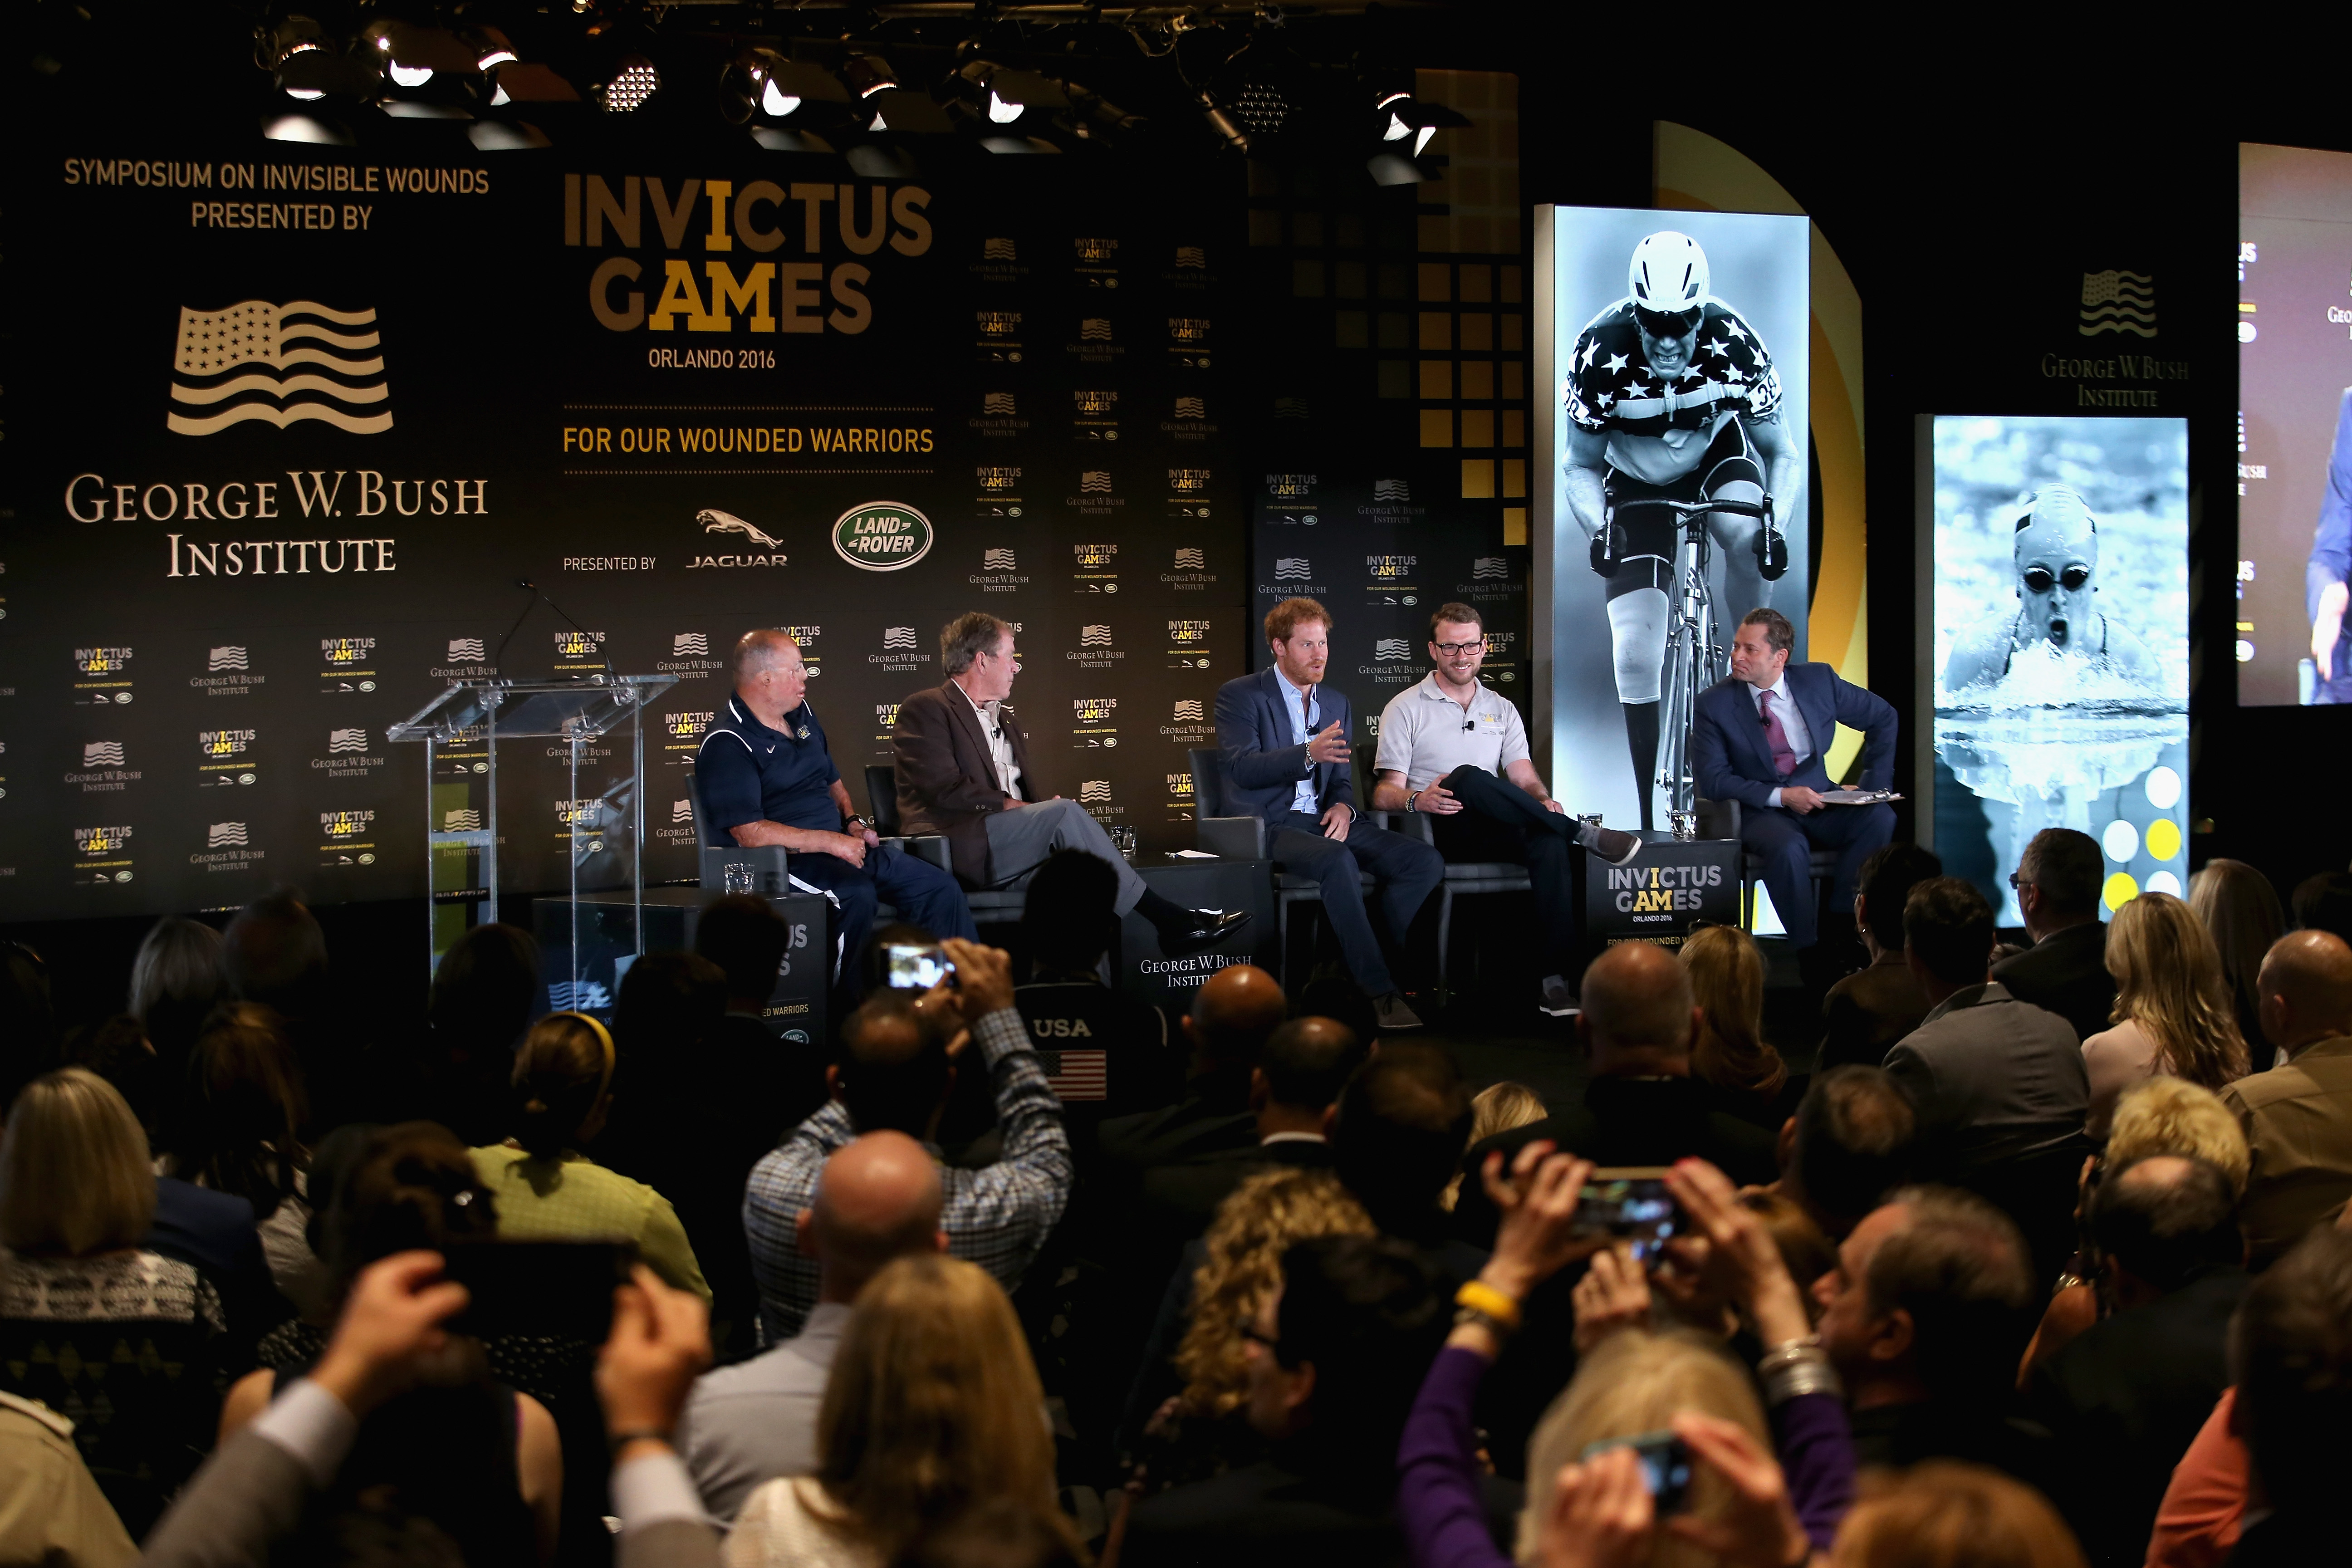 ORLANDO, FL - MAY 08: Prince Harry, Former President George W Bush Royal Marine veteran JJ Chalmers (R) and Air Force Technical Sgt. Israel Del Toro (L) talk at a Symposium of Invisable Wounds at the Shades of Green resort at Invictus Games Orlando 2016 at ESPN Wide World of Sports on May 8, 2016 in Orlando, Florida. Prince Harry, patron of the Invictus Games Foundation is in Orlando ahead of the opening of Invictus Games which will open on Sunday. The Invictus Games is the only International sporting event for wounded, injured and sick servicemen and women. Started in 2014 by Prince Harry the Invictus Games uses the power of Sport to inspire recovery and support rehabilitation.   Chris Jackson/Getty Images for Invictus/AFP